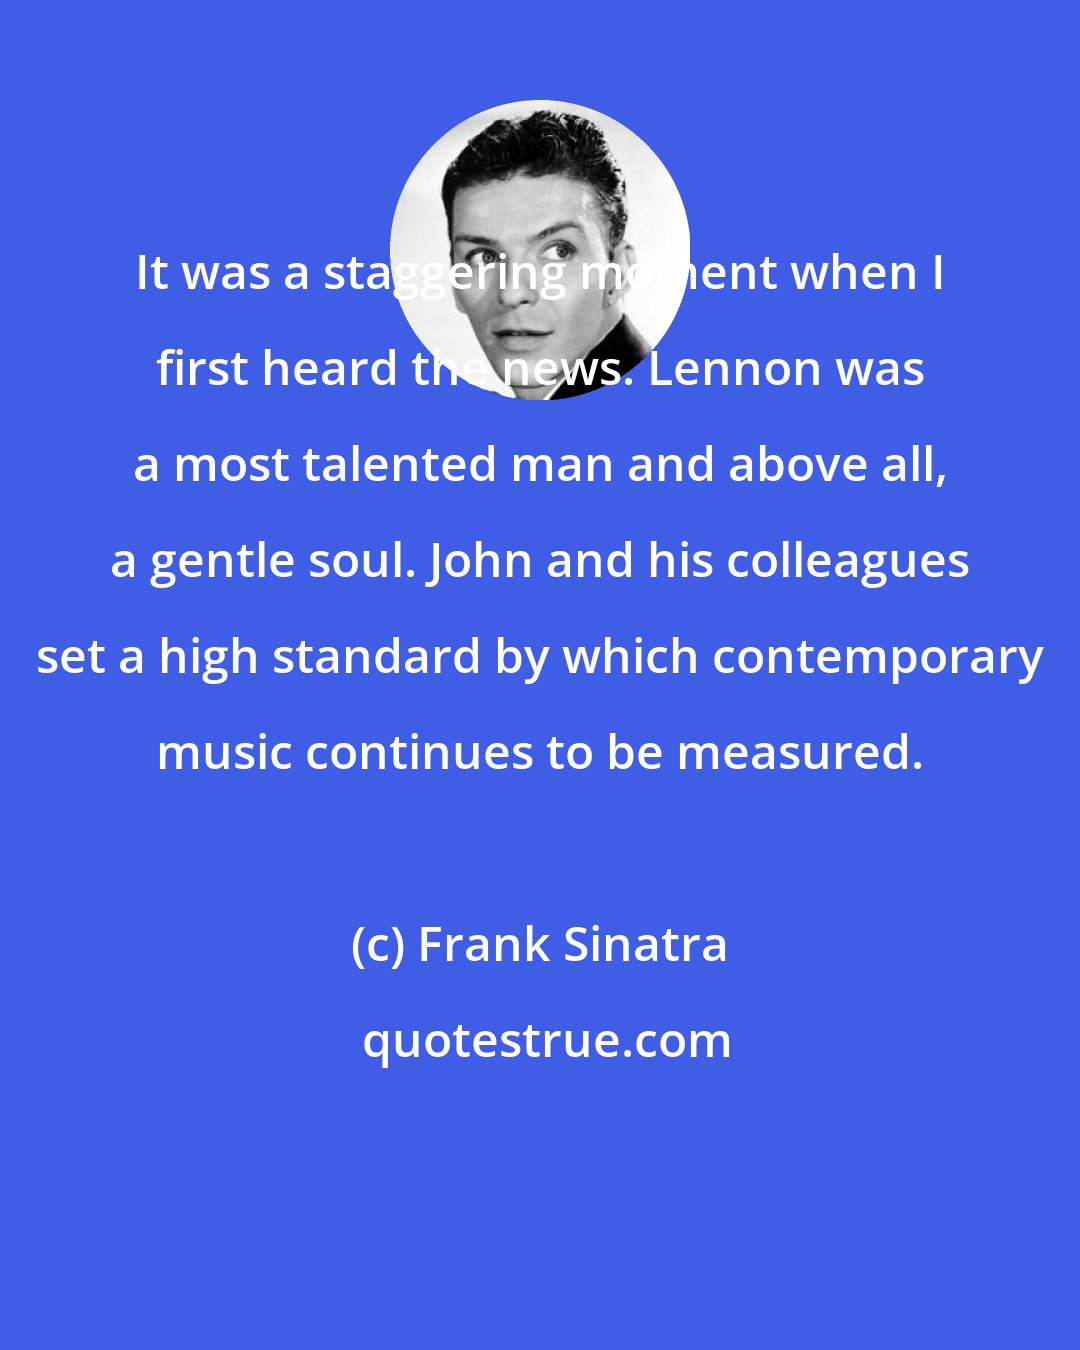 Frank Sinatra: It was a staggering moment when I first heard the news. Lennon was a most talented man and above all, a gentle soul. John and his colleagues set a high standard by which contemporary music continues to be measured.